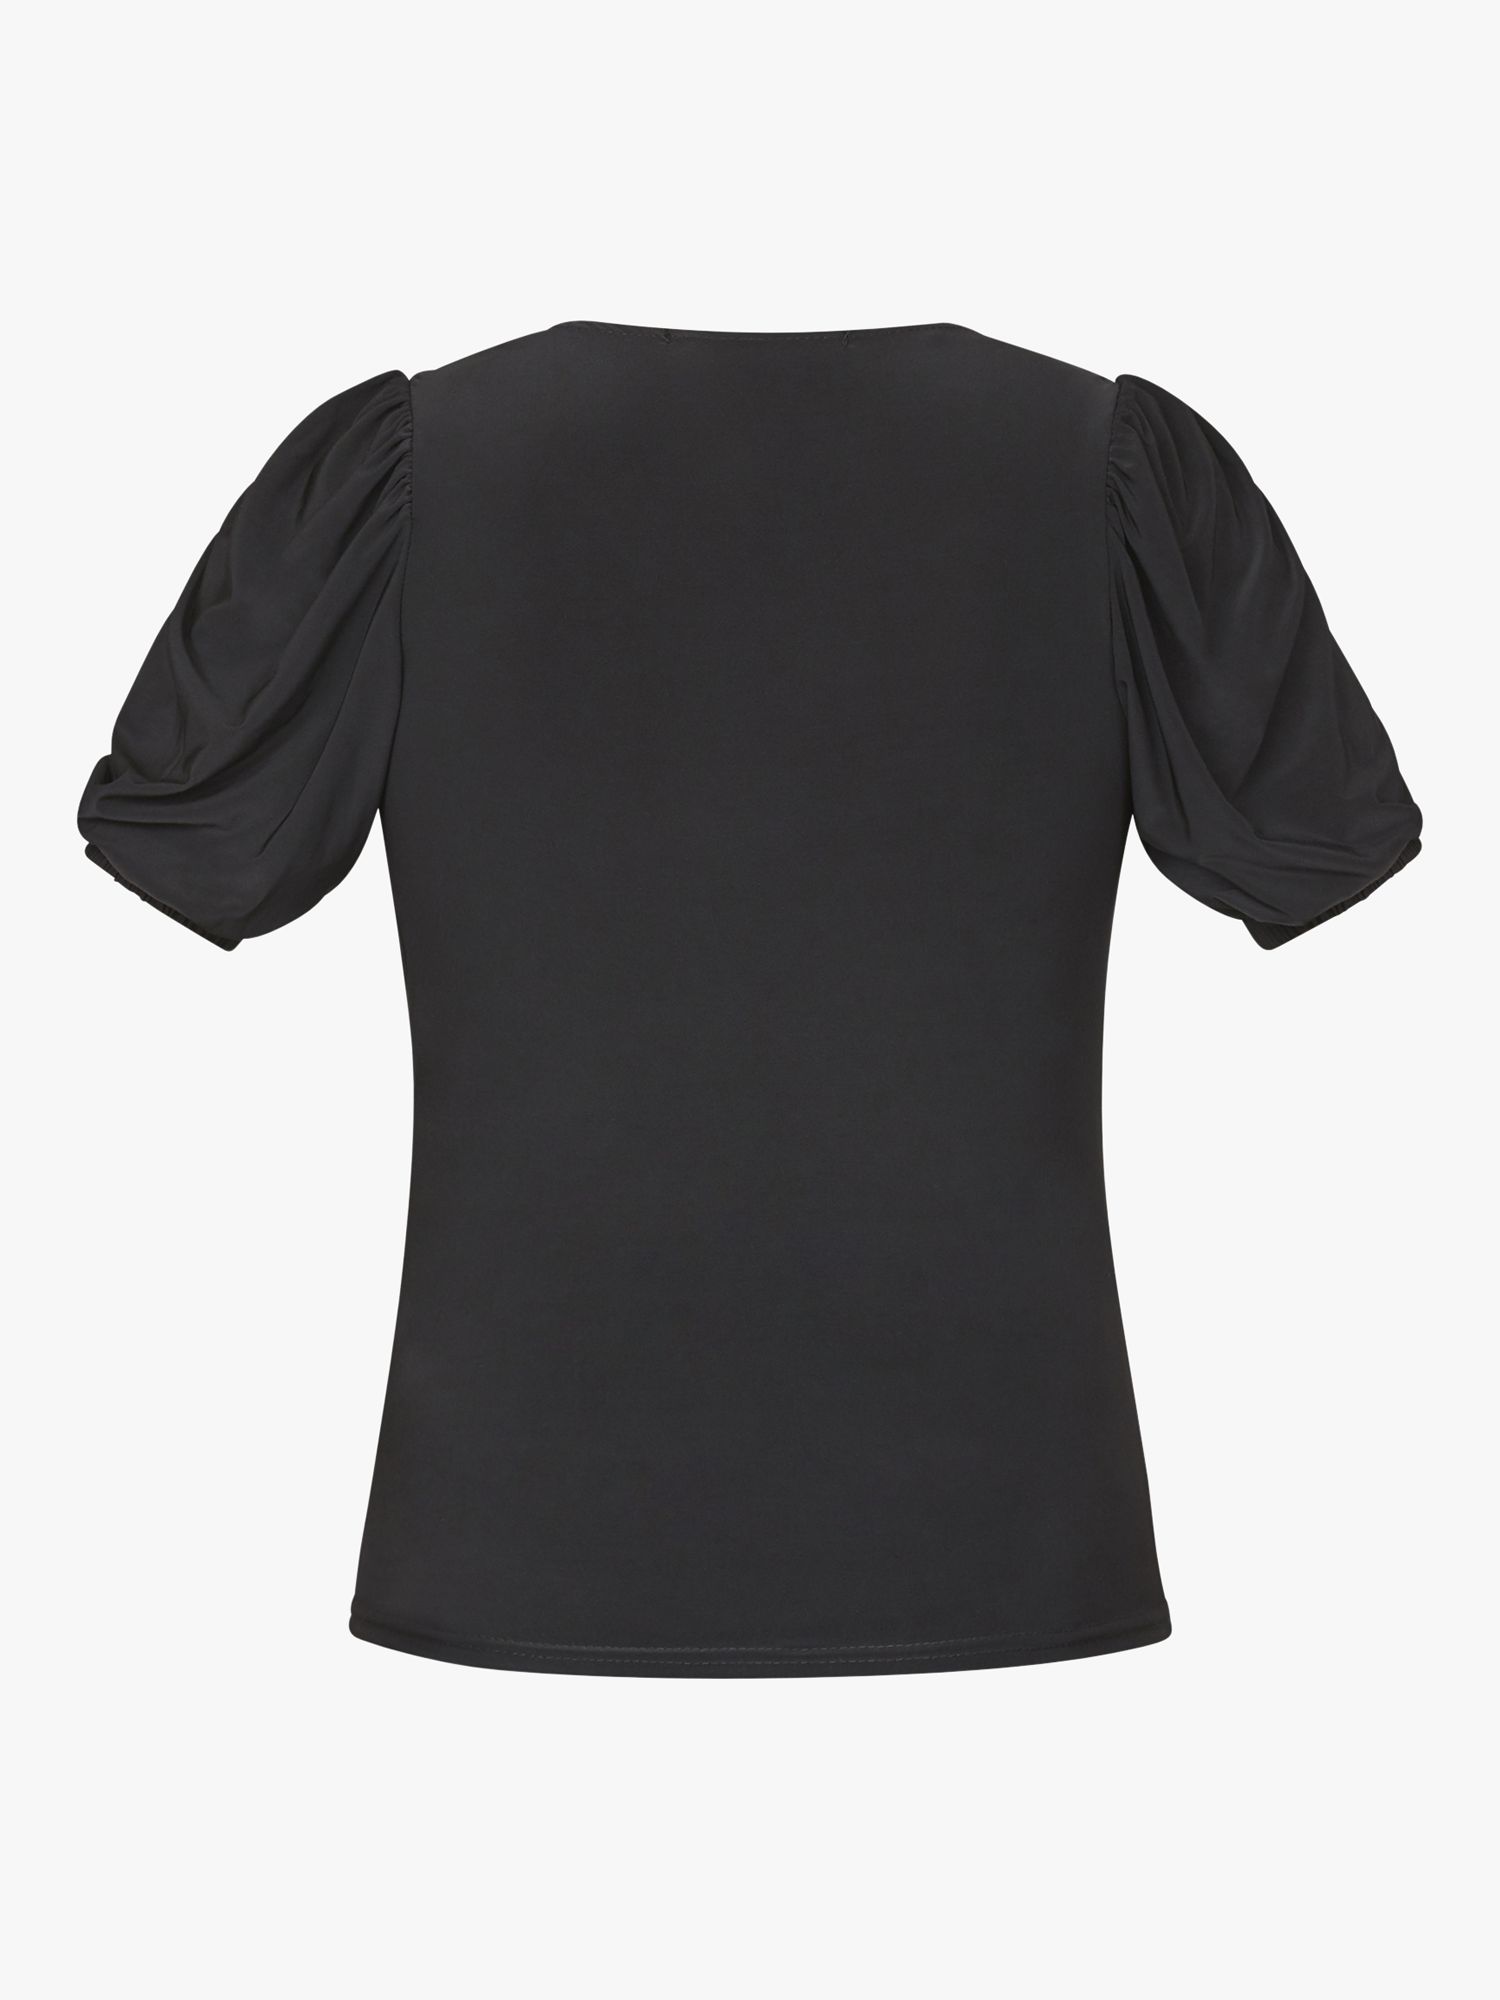 Buy Sisters Point Waterfall Neckline Slim Fitted Top Online at johnlewis.com